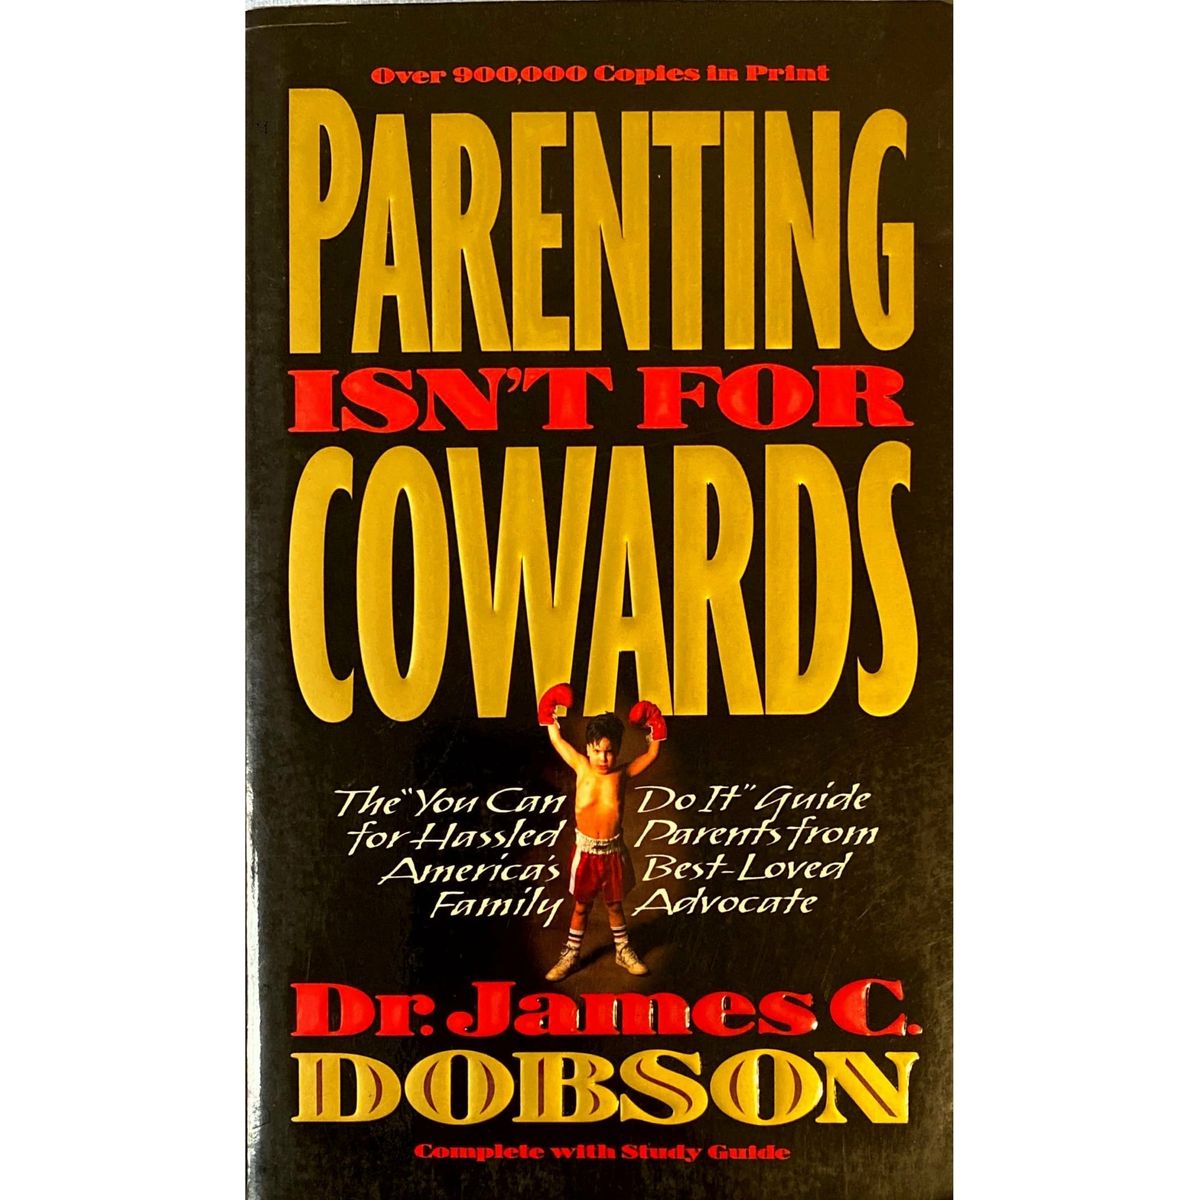 ISBN: 9780849940149 / 0849940141 - Parenting Isn't for Cowards by James C. Dobson [1997]